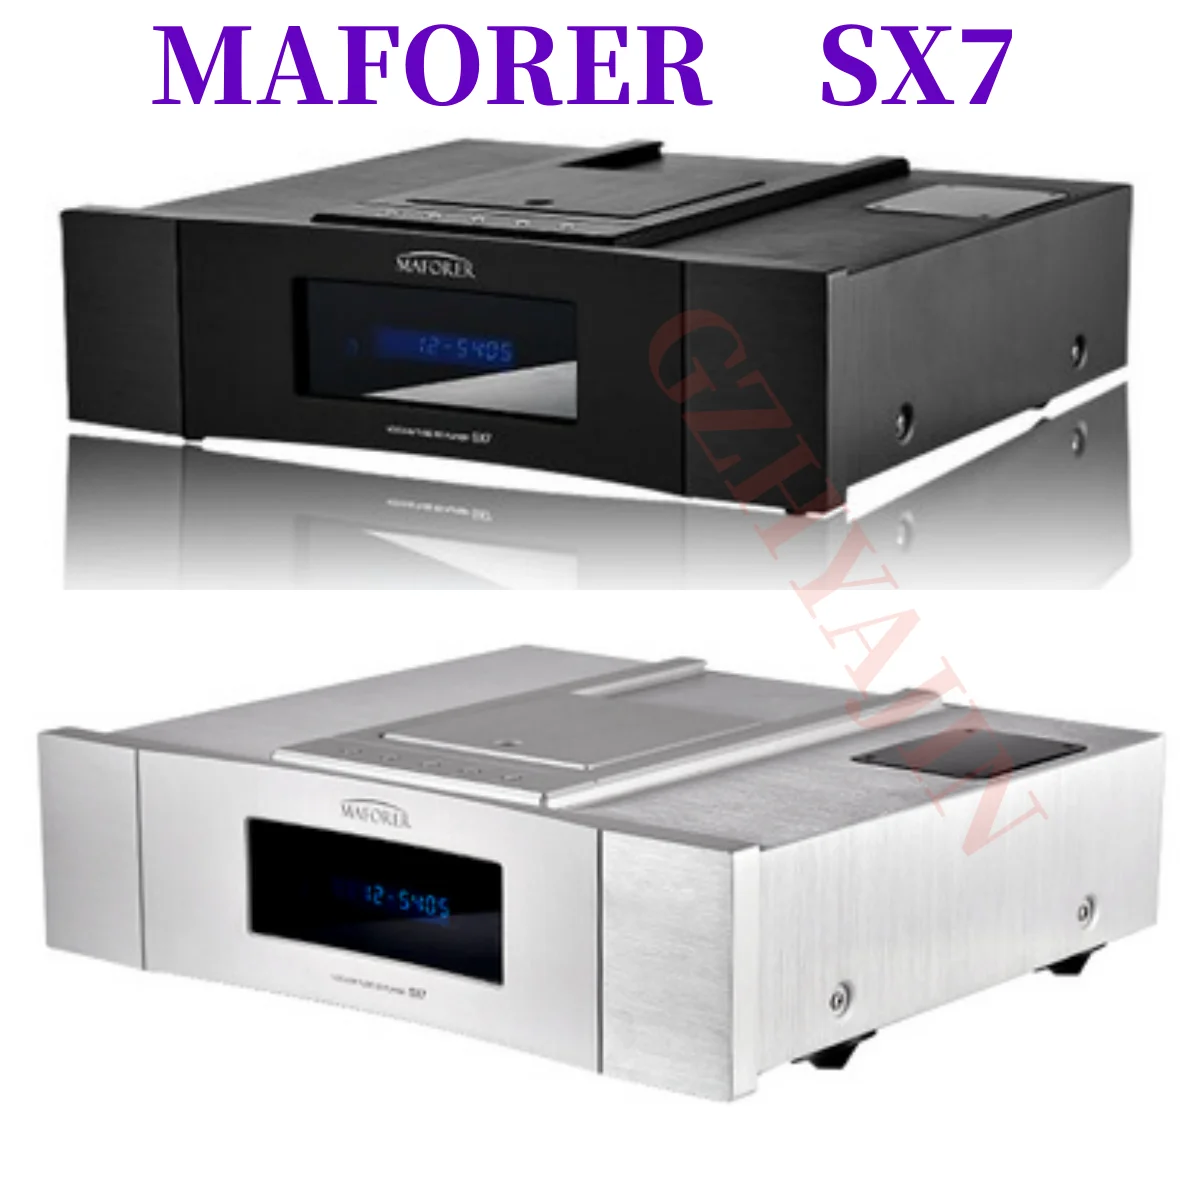 

New MAFORER/SX7 pure gallbladder CD player with fever, high fidelity and lossless external Bluetooth player